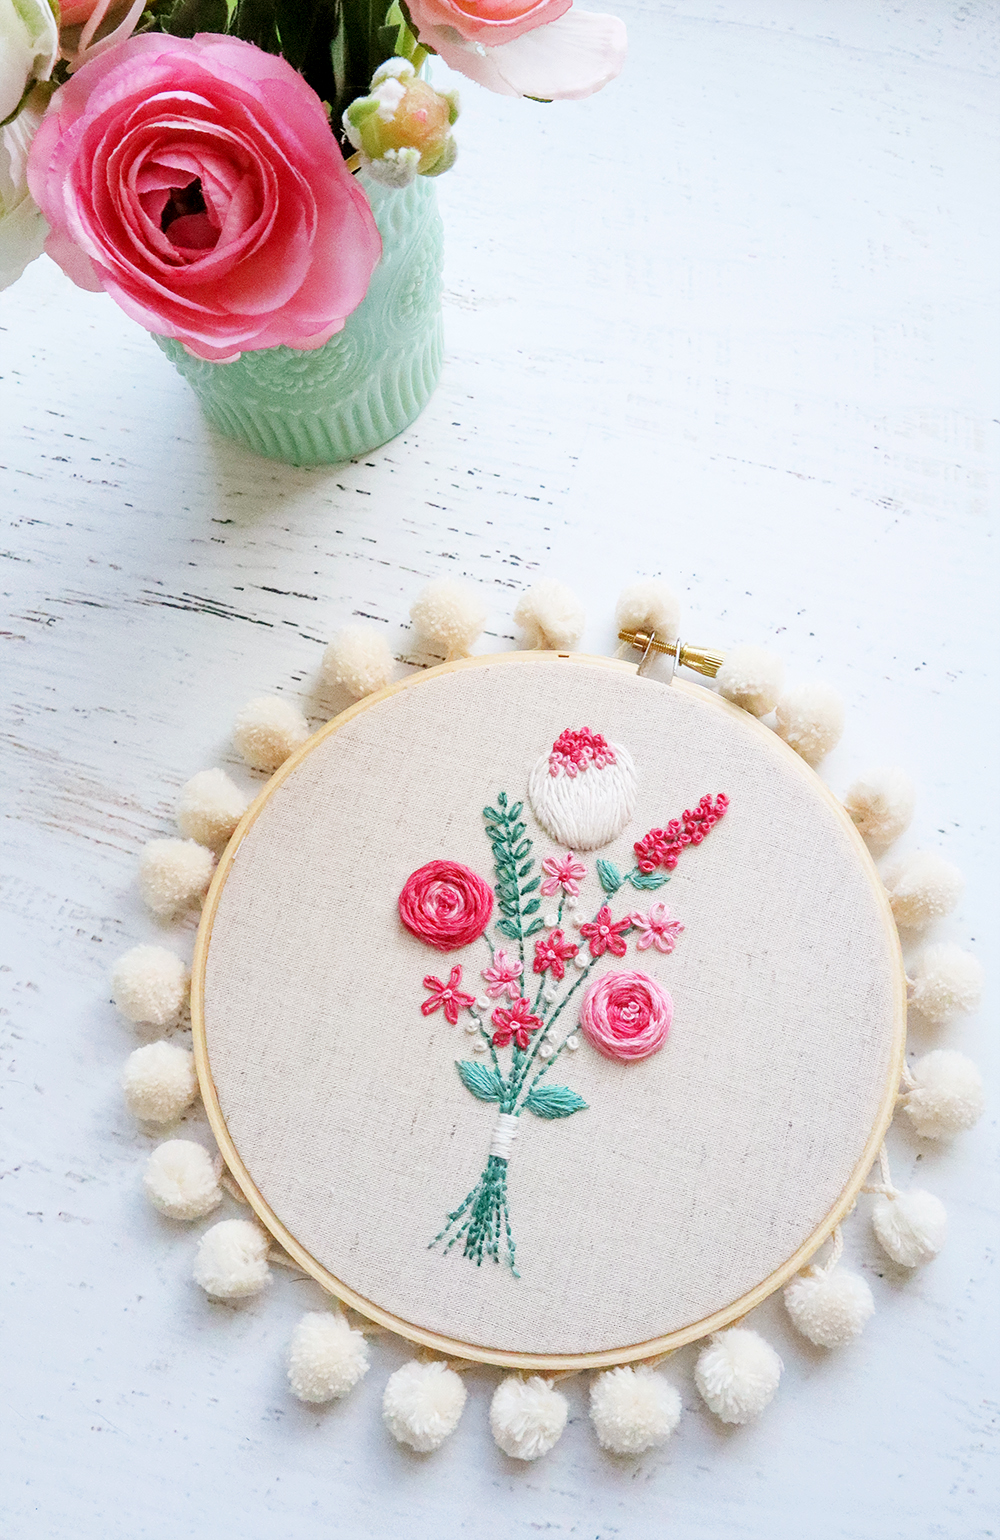 How to Transfer Embroidery Designs - Embroidery Basics Tutorial